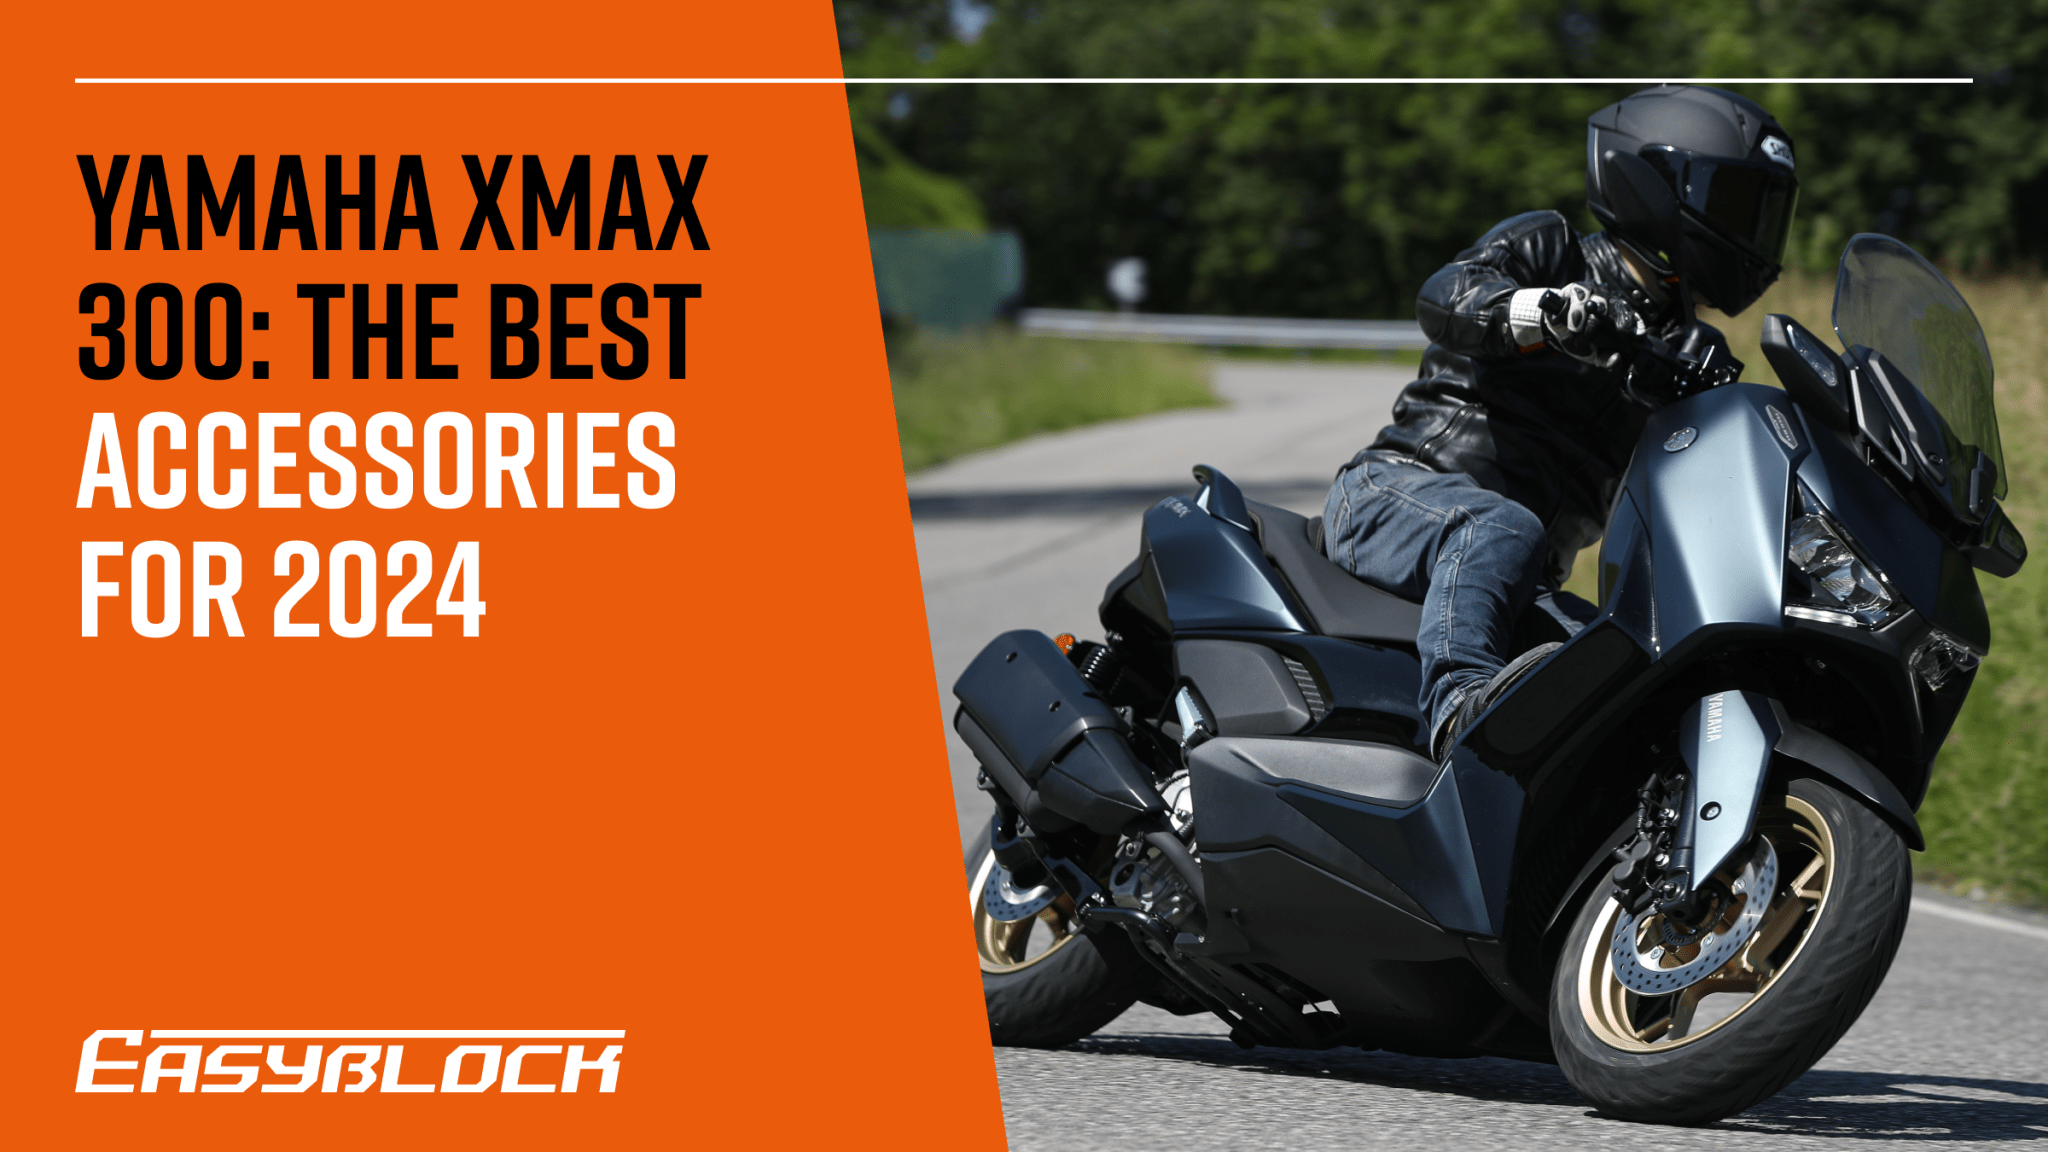 Yamaha XMAX 300: Top 10 Accessories for 2024